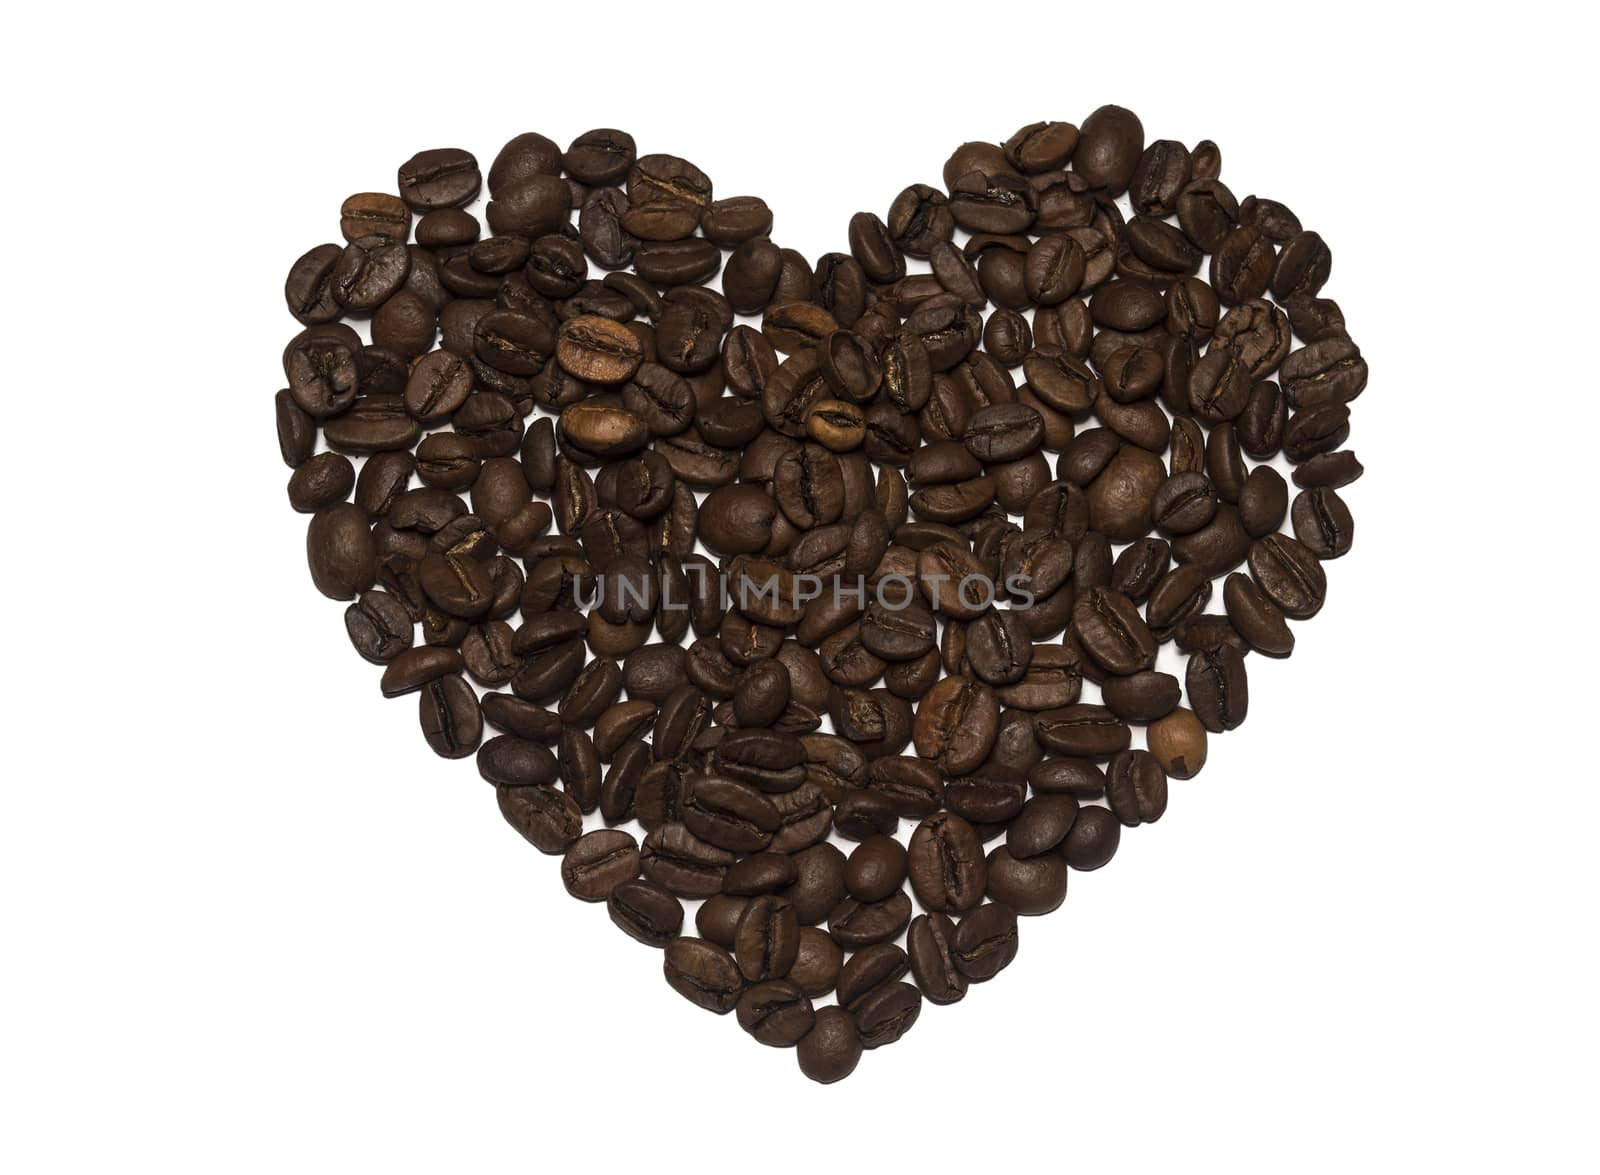 Heart shaped coffee beans isolated on white background